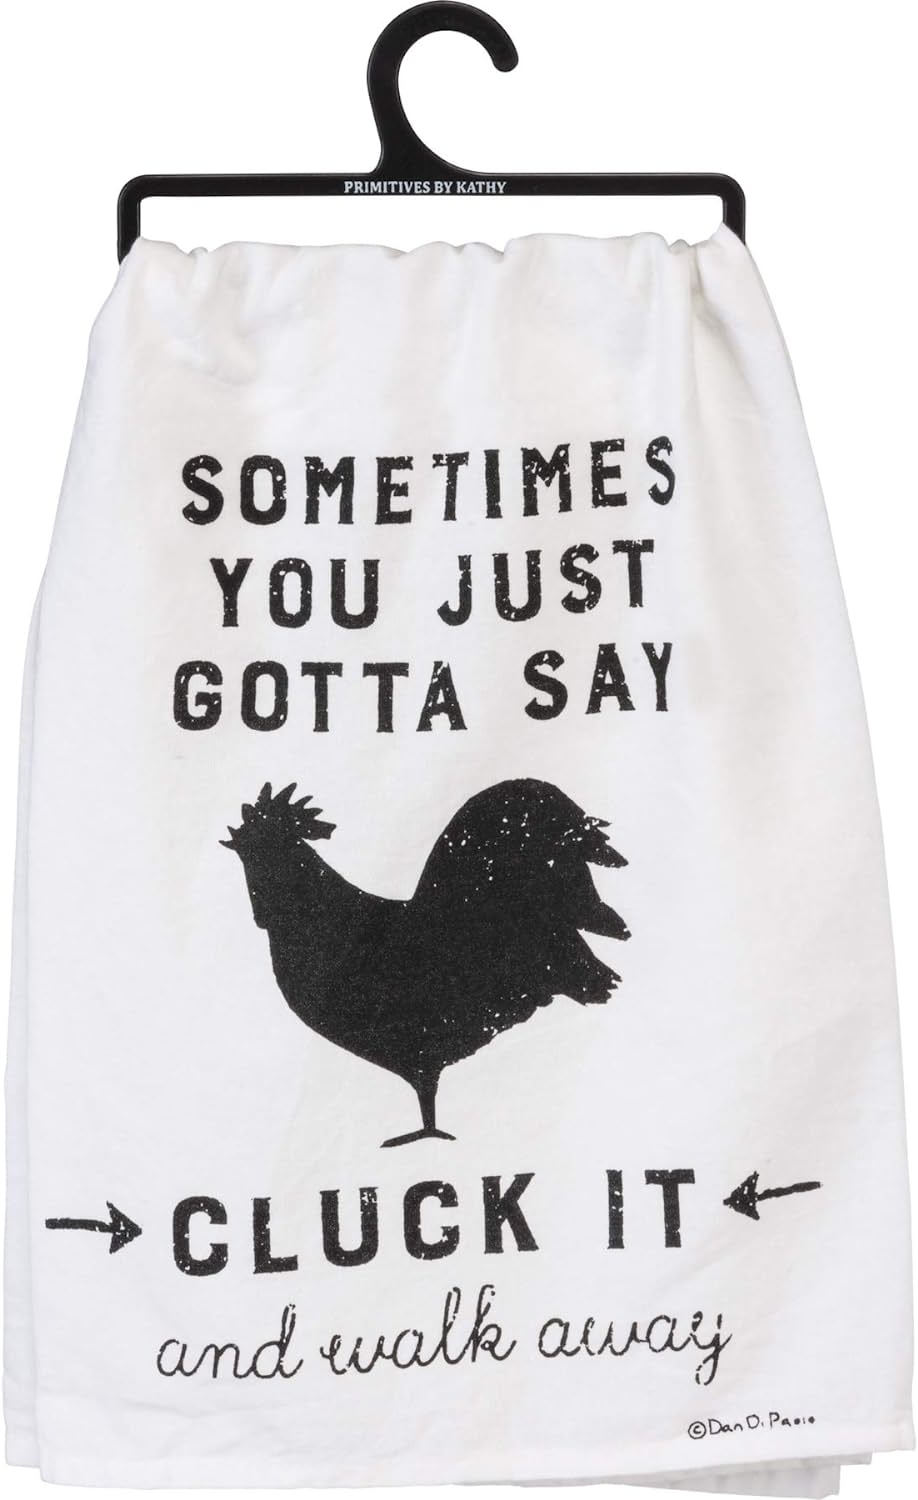 Primitives by Kathy Sometimes You Just Gotta Say Cluck It and Walk Away Decorative Bath Towel